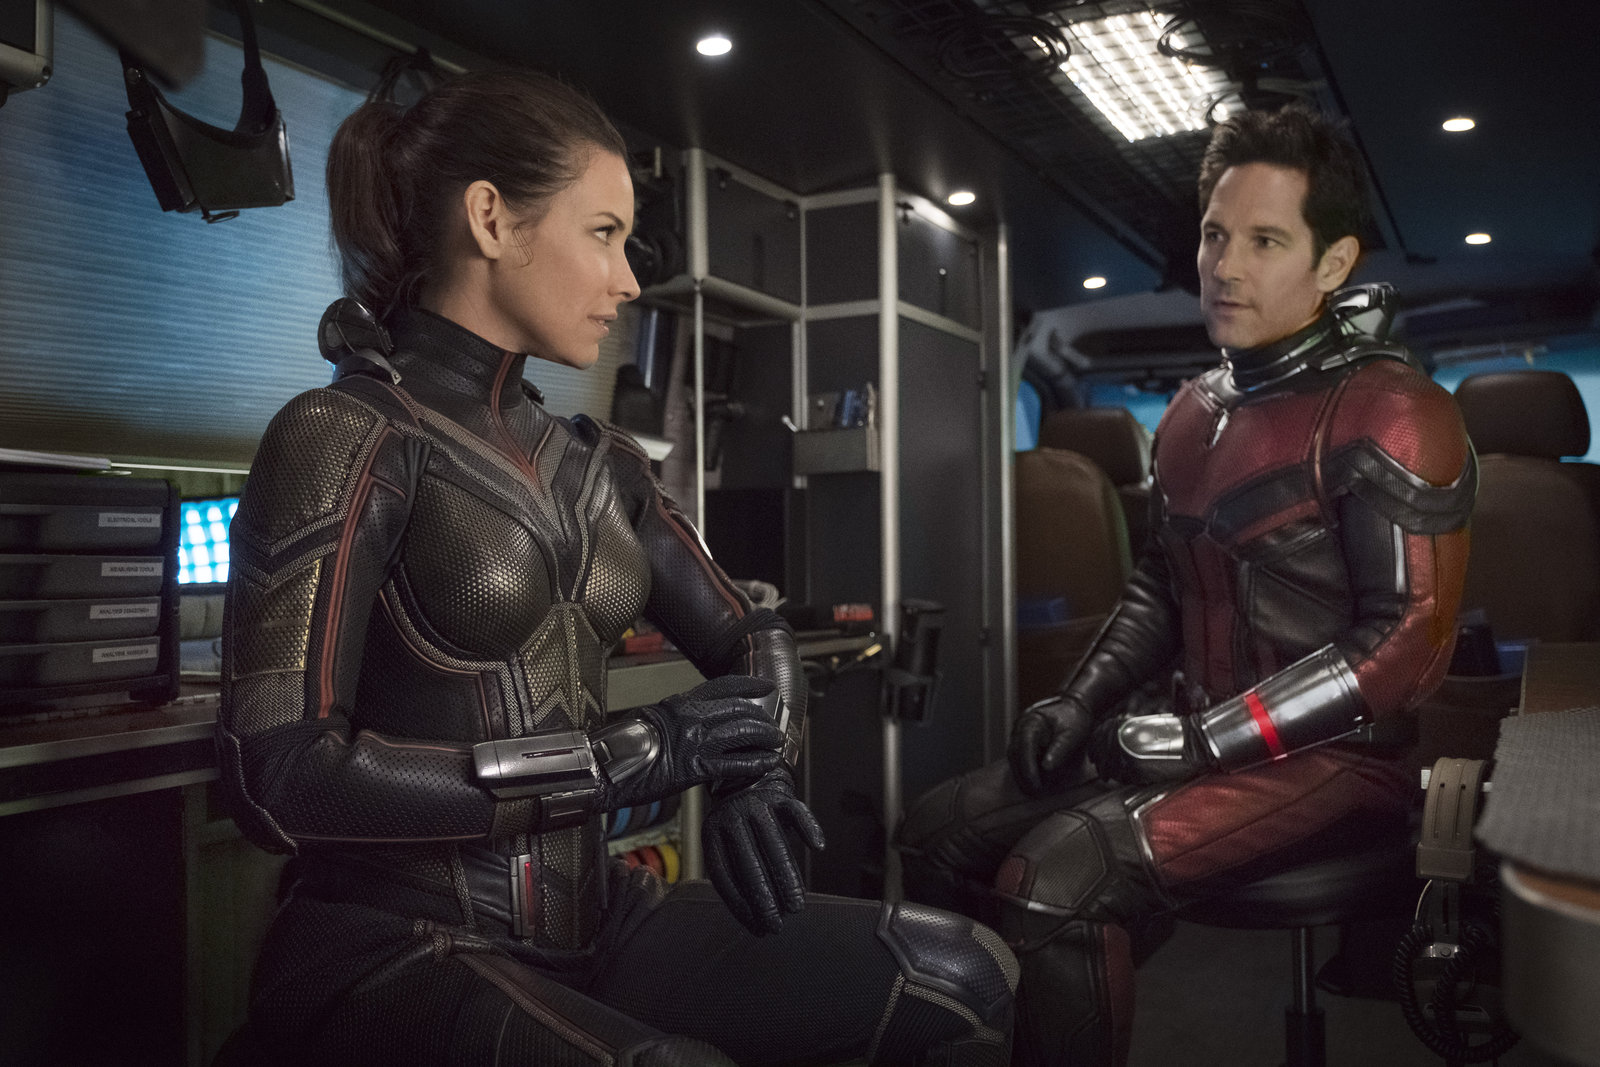 Ant-Man and the Wasp (blu-ray)